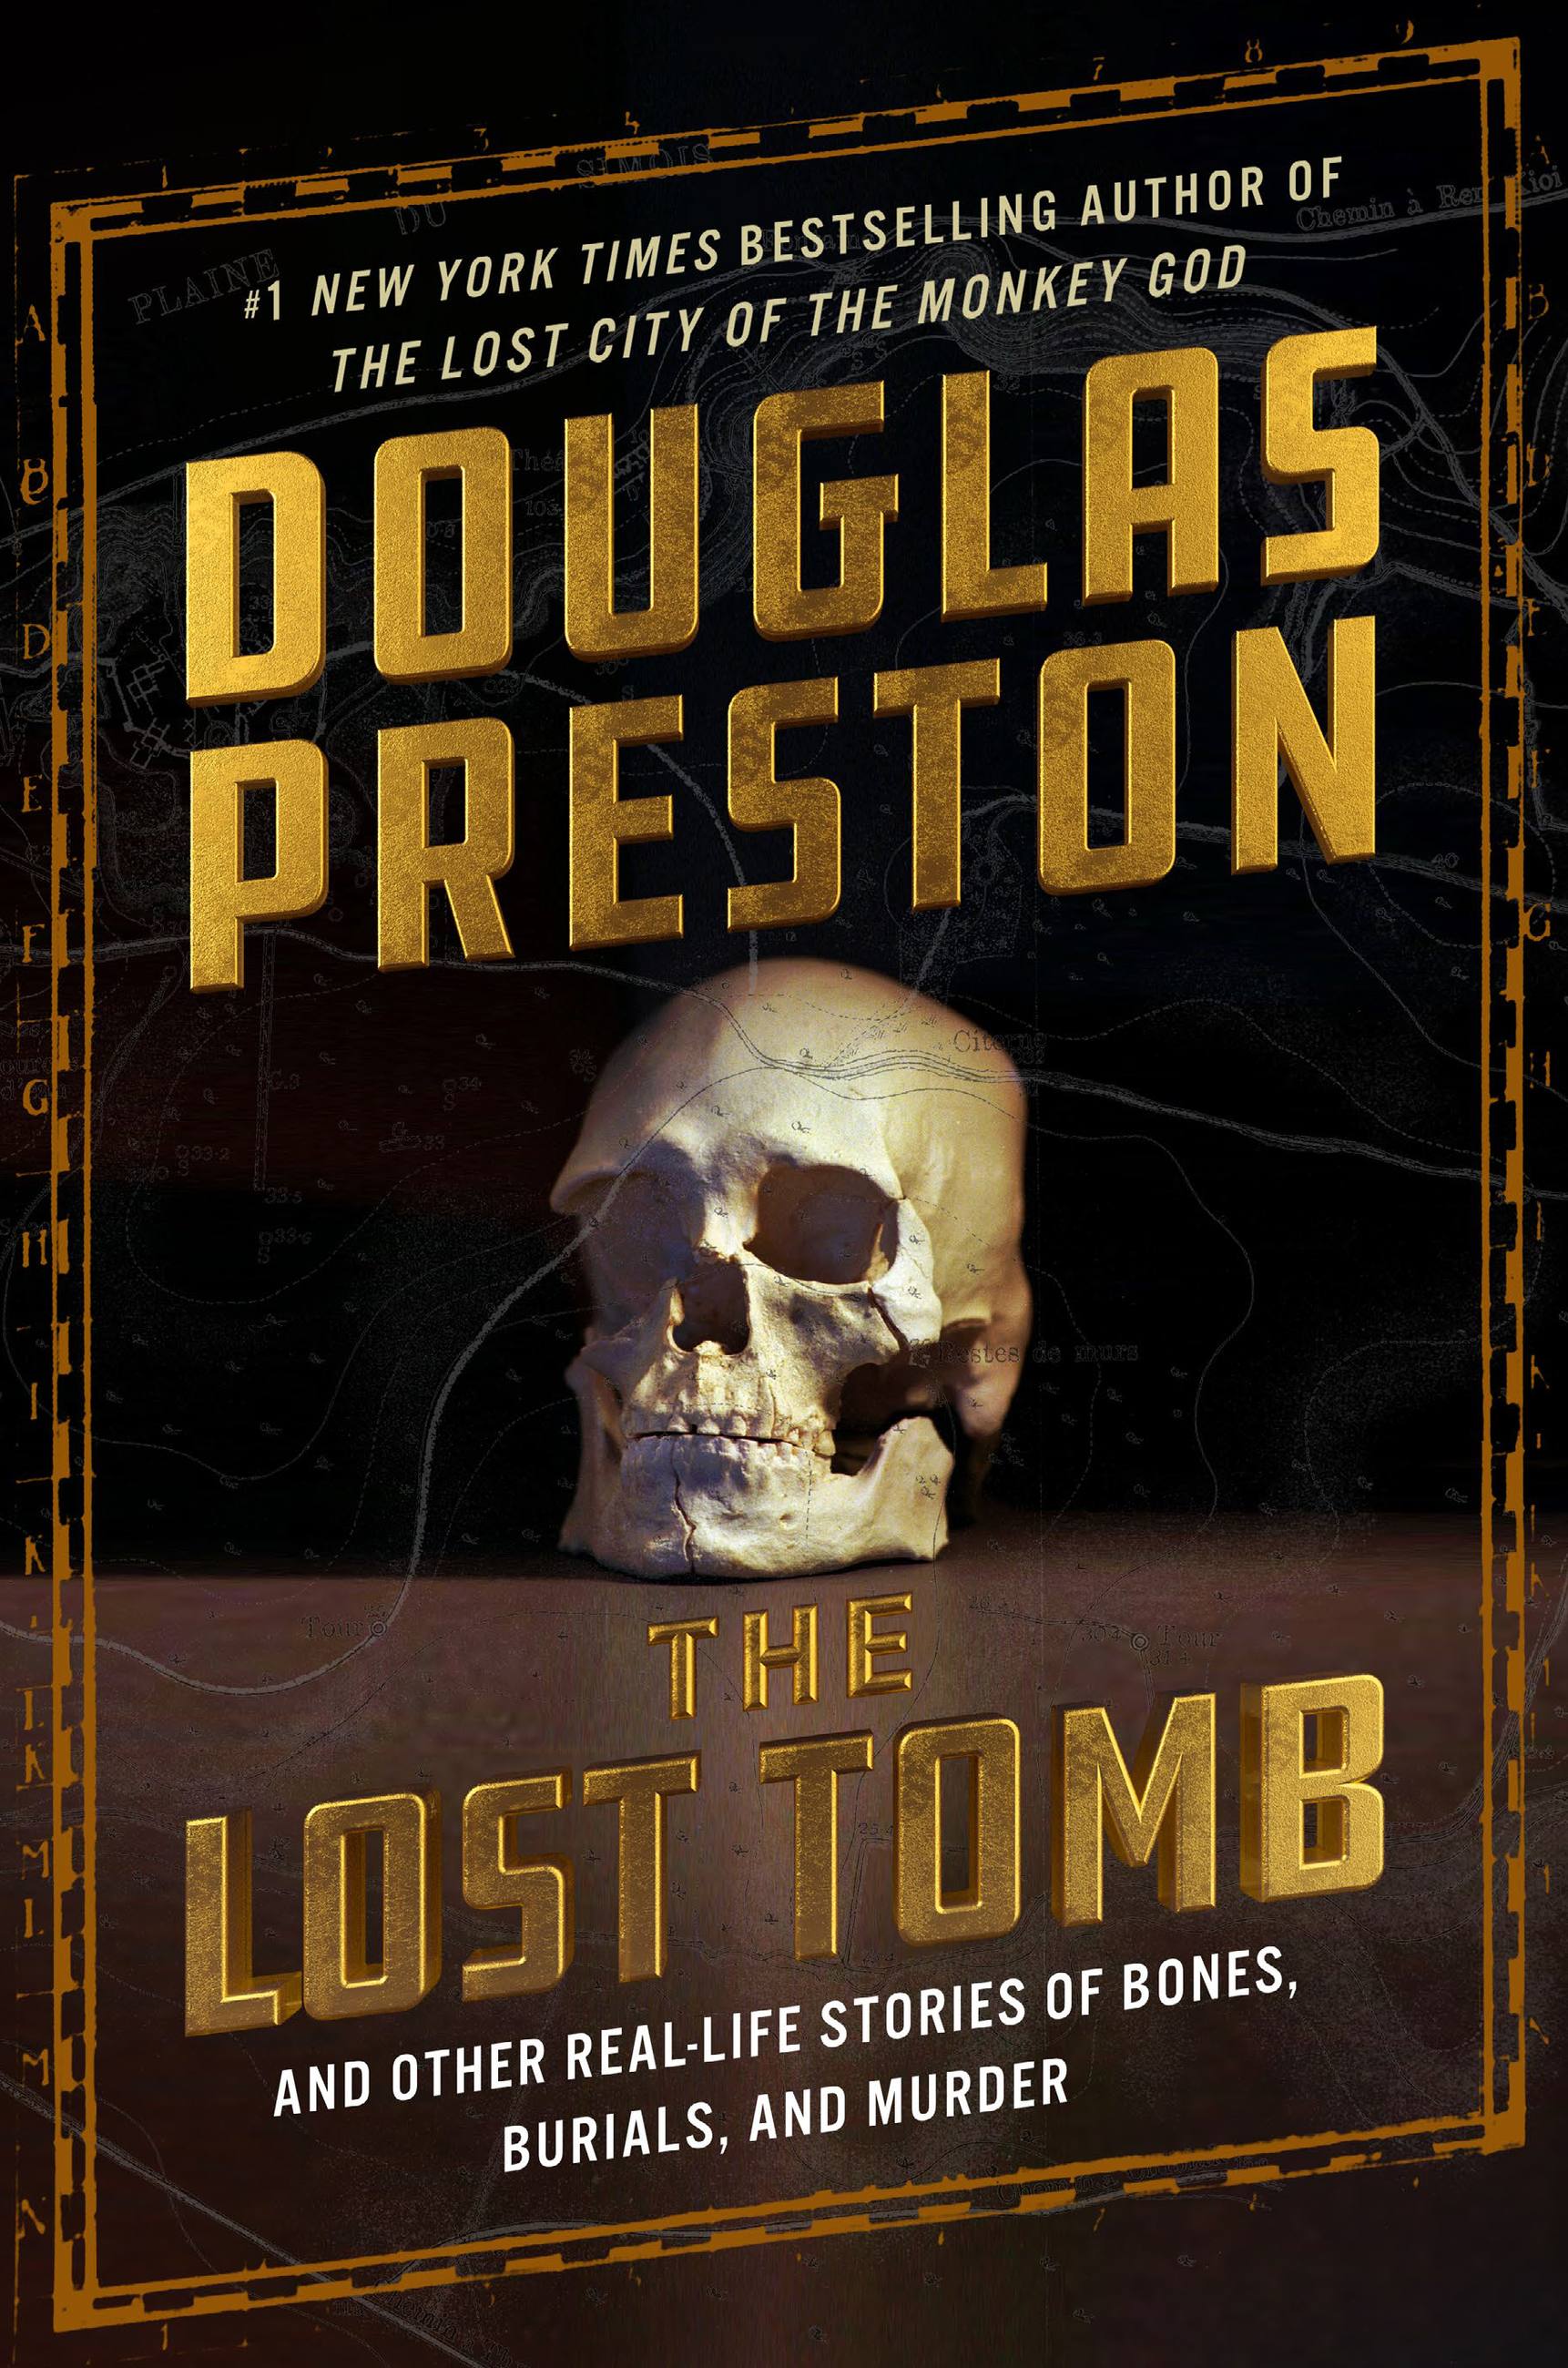 Cover image for The Lost Tomb [electronic resource] : And Other Real-Life Stories of Bones, Burials, and Murder